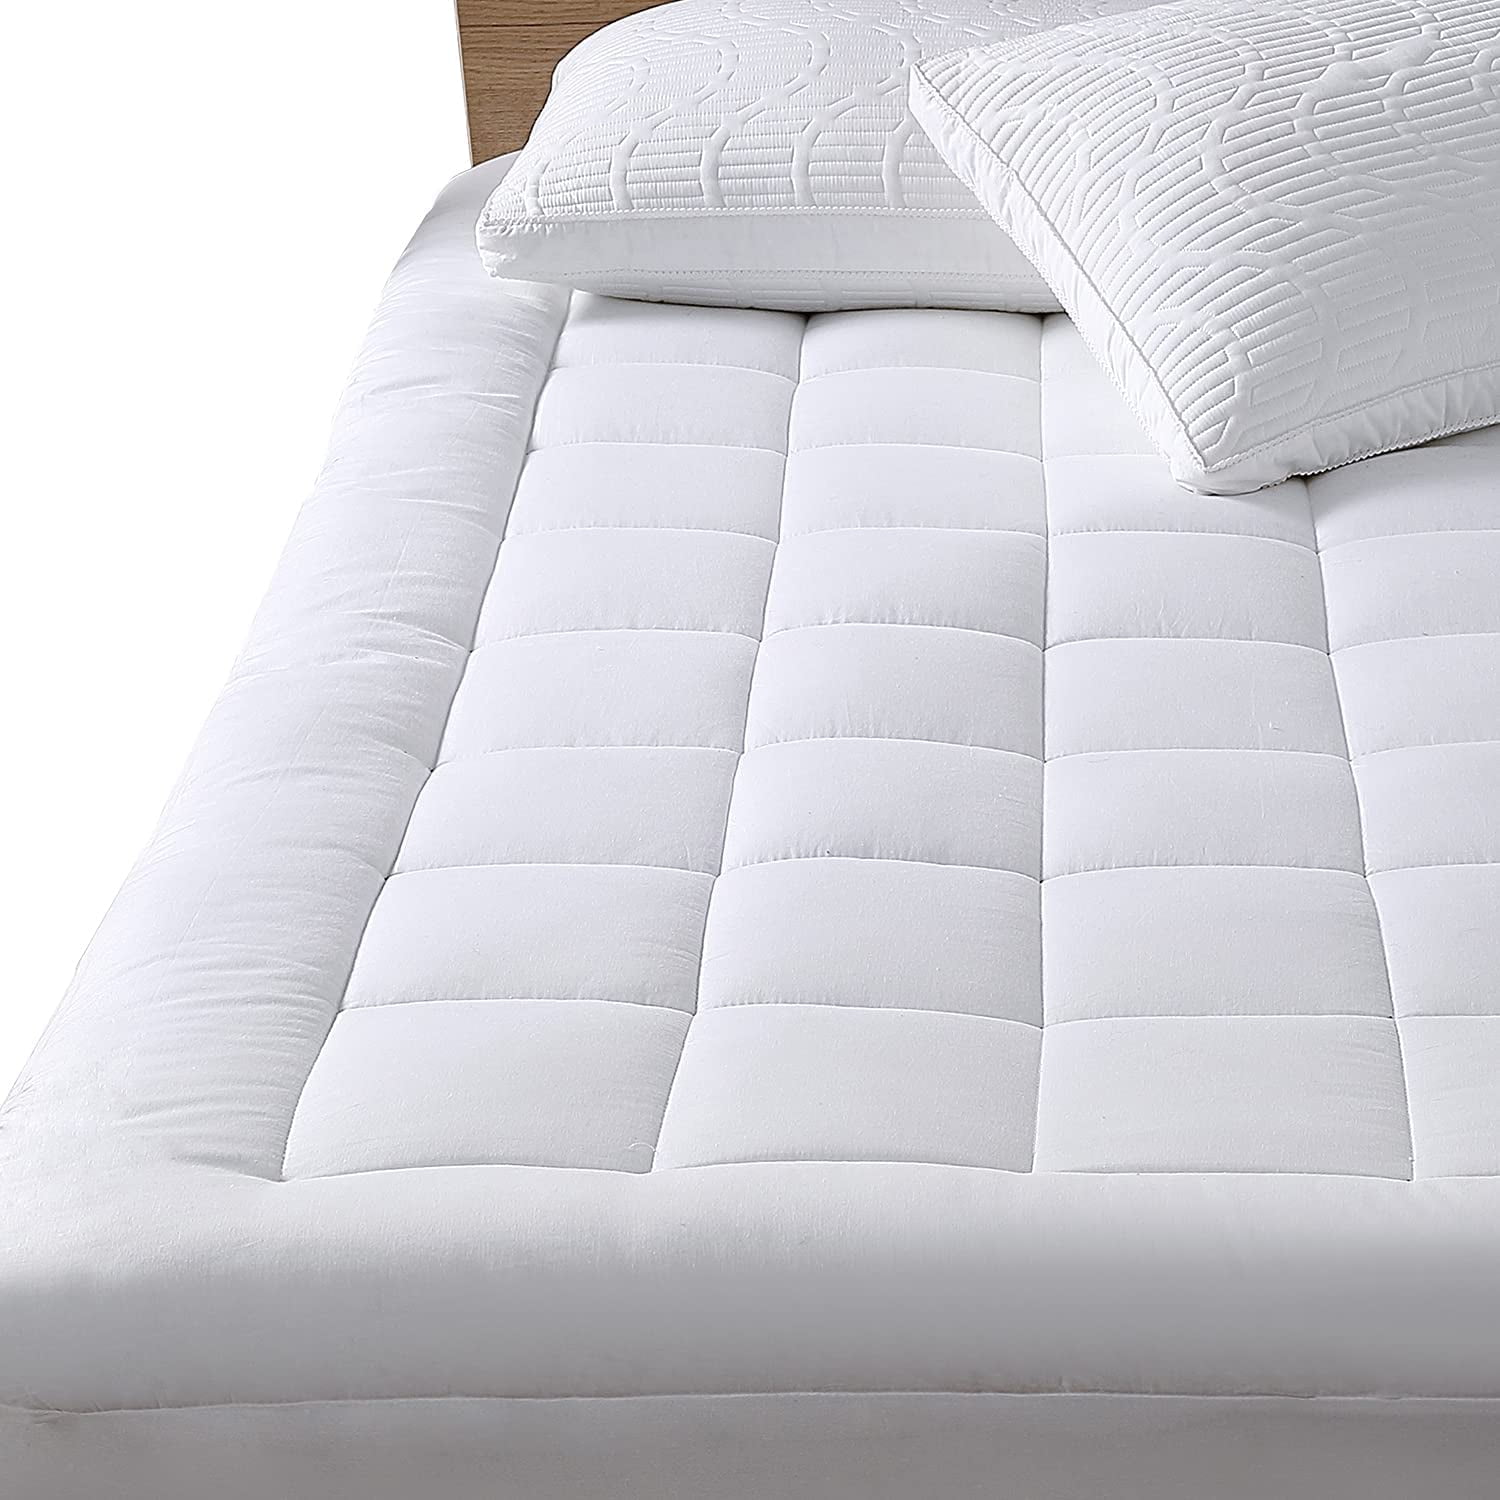 400 Thread Count Cooling Pillow Top Plush Topper SOPAT Full Mattress Pad Cover 